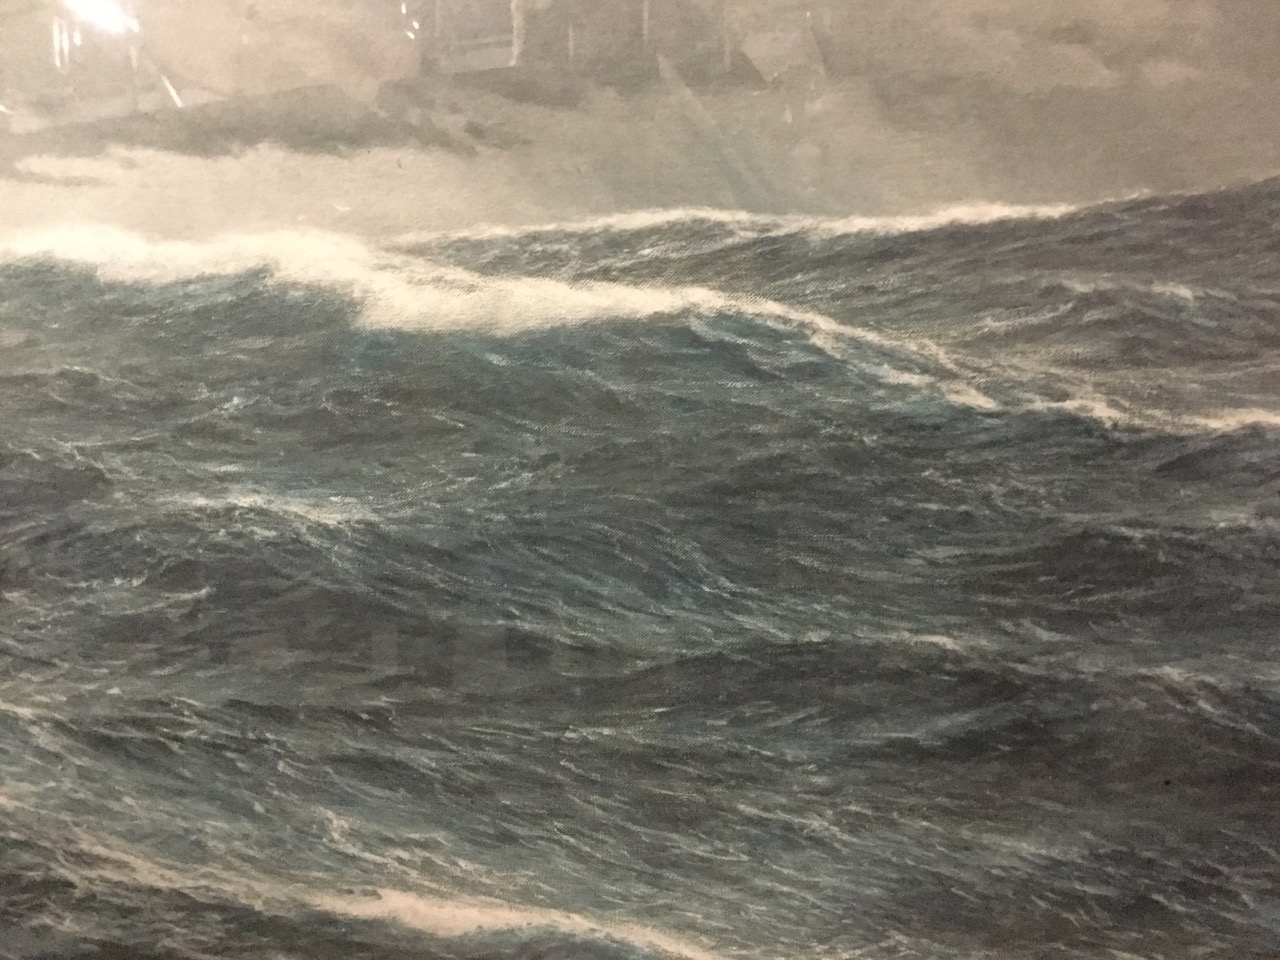 Schnars Alquist, lithographic print of stormy seas, mounted & oak framed. (33.75in x 21.5in) - Image 3 of 3